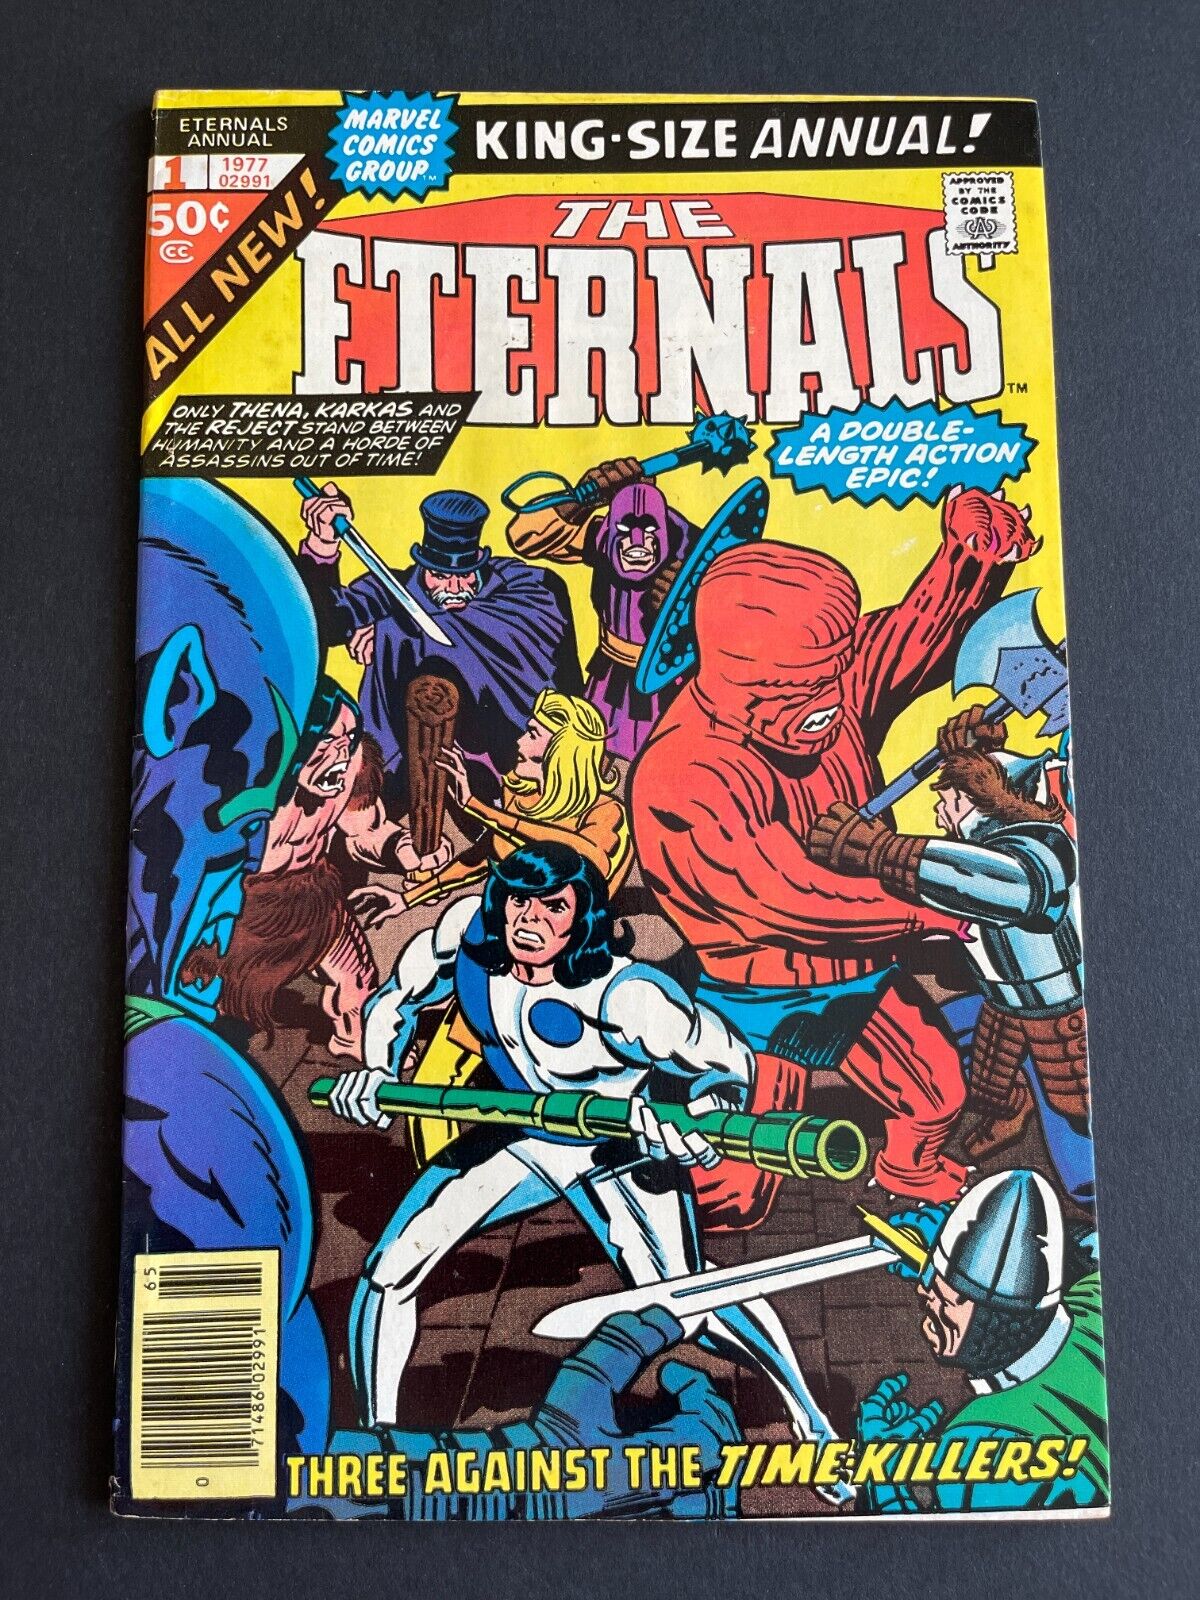 Eternals Annual #1 - The Time Killers (Marvel, 1977) VG